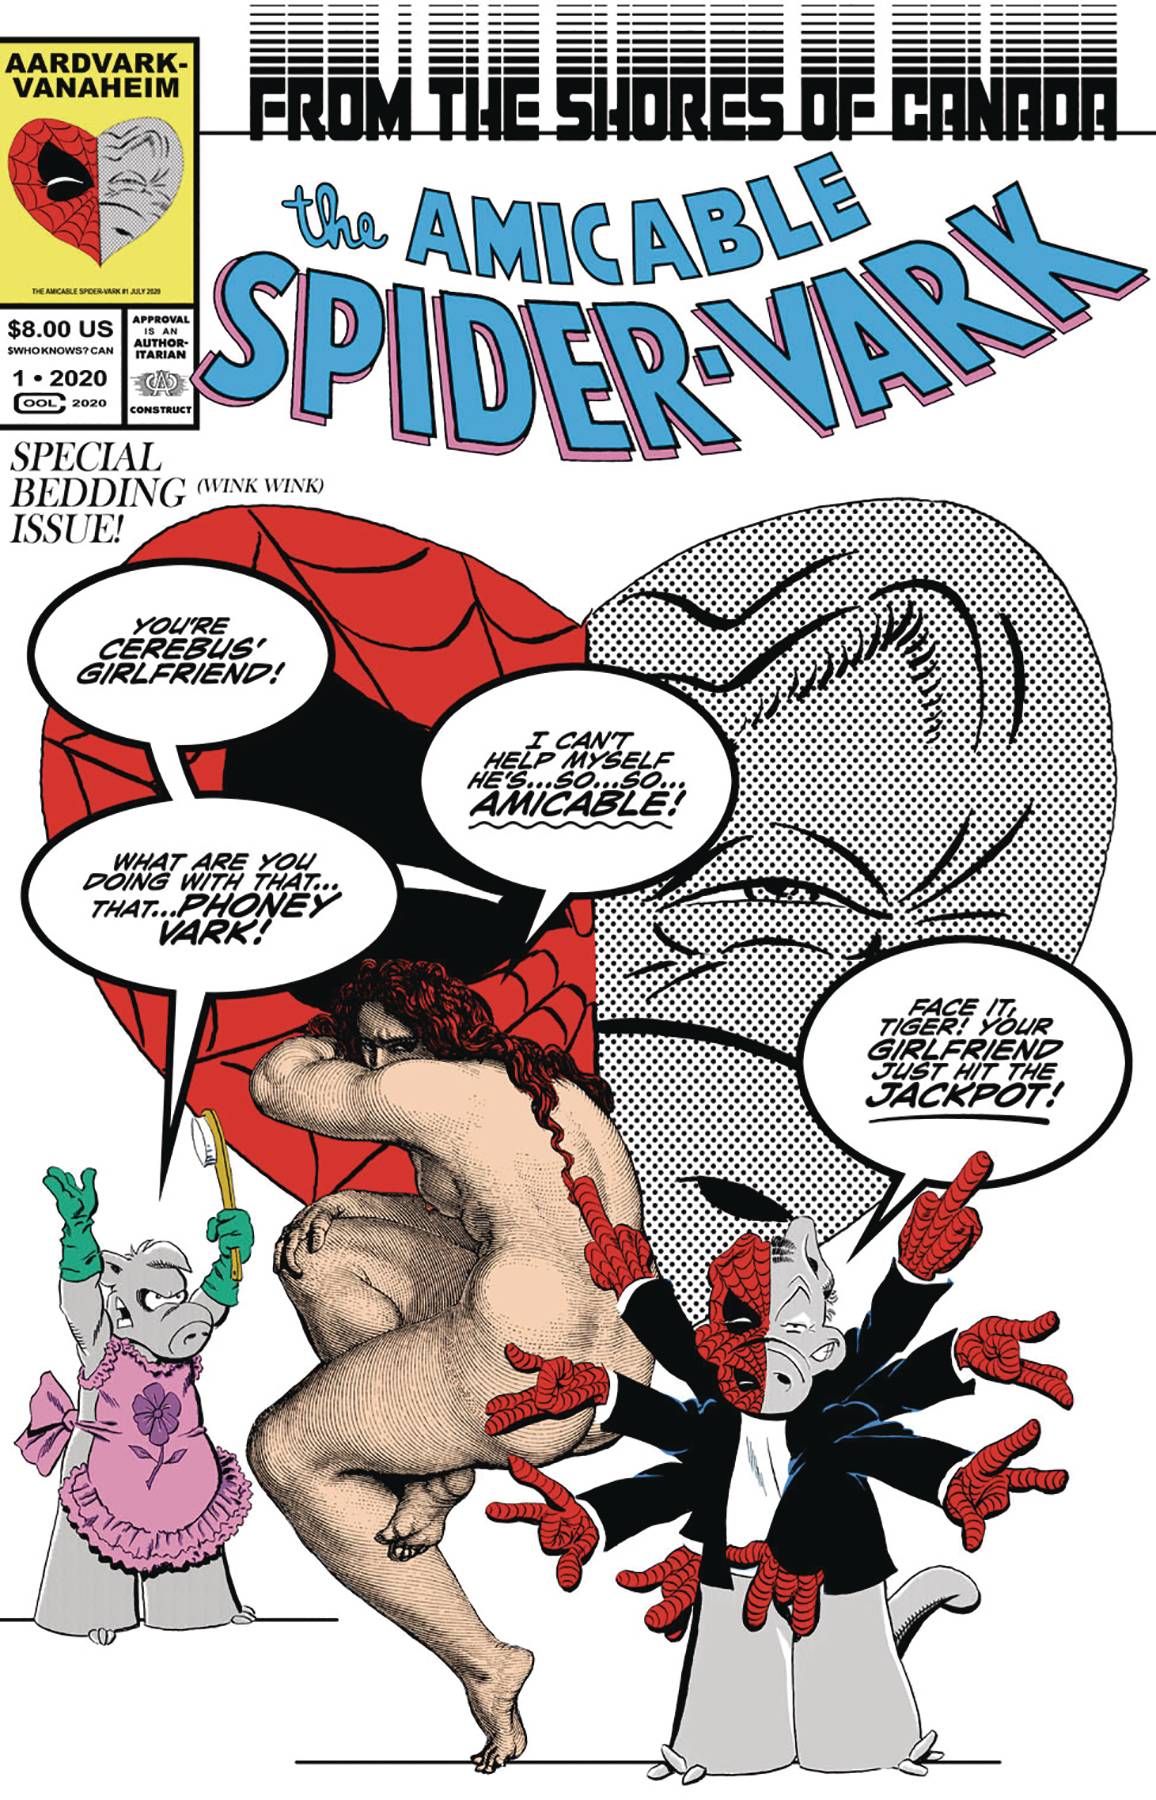 AMICABLE SPIDER VARK ANNUAL ONE SHOT